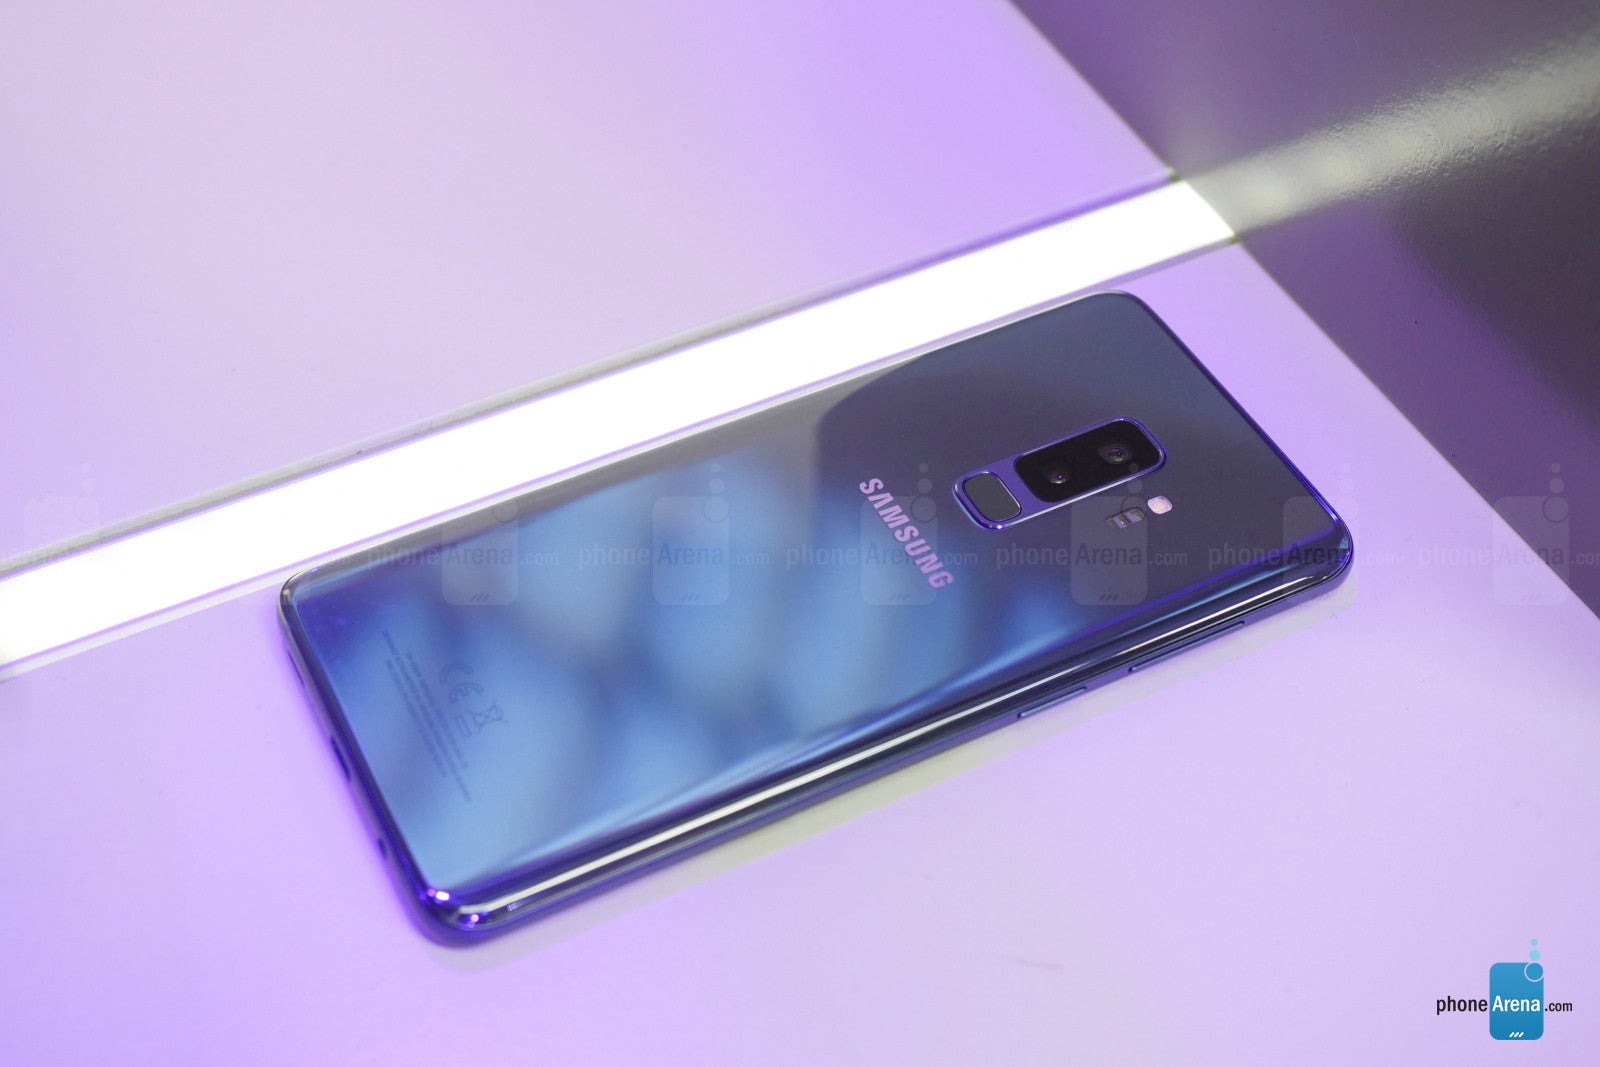 The Samsung Galaxy S9 and S9+ are here: Awesome cameras, dazzling bezel-less design, and power to match